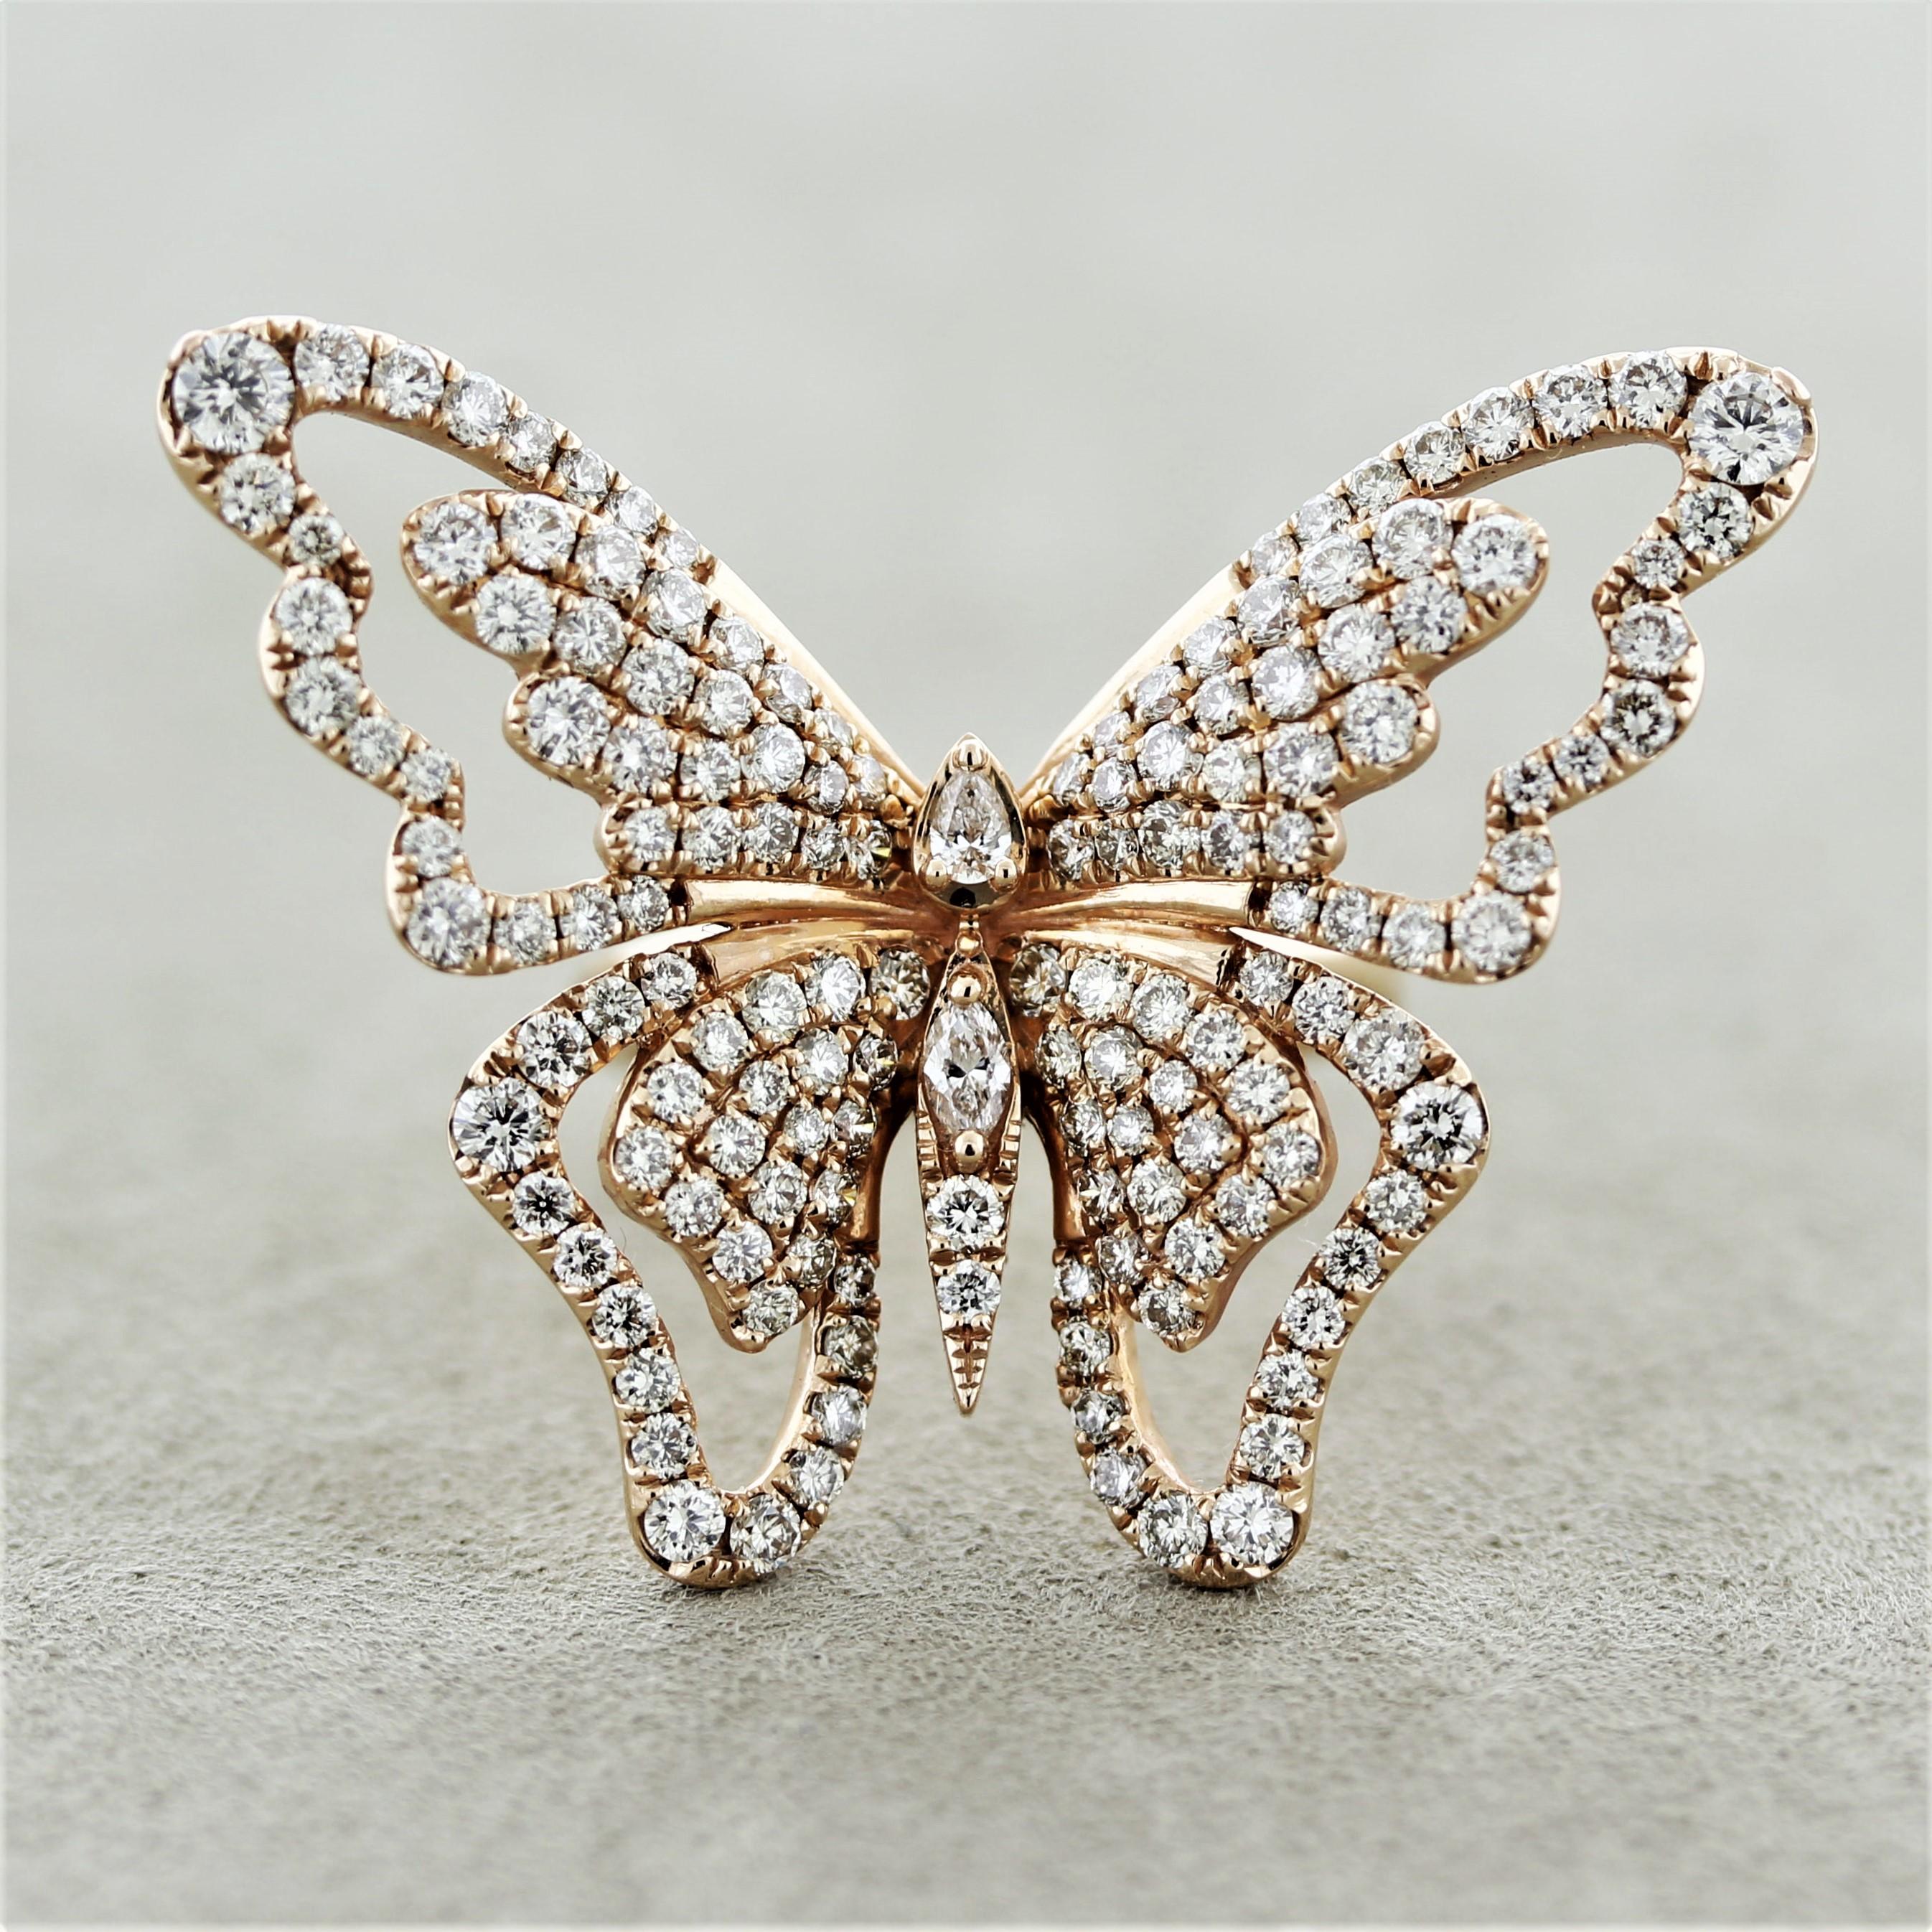 A fun and dazzling ring featuring 3 carats of round brilliant, pear, and marquise shaped diamond set over a lovely golden butterfly. The ring is made in 14k rose gold and ready to be worn.

Ring Size 7